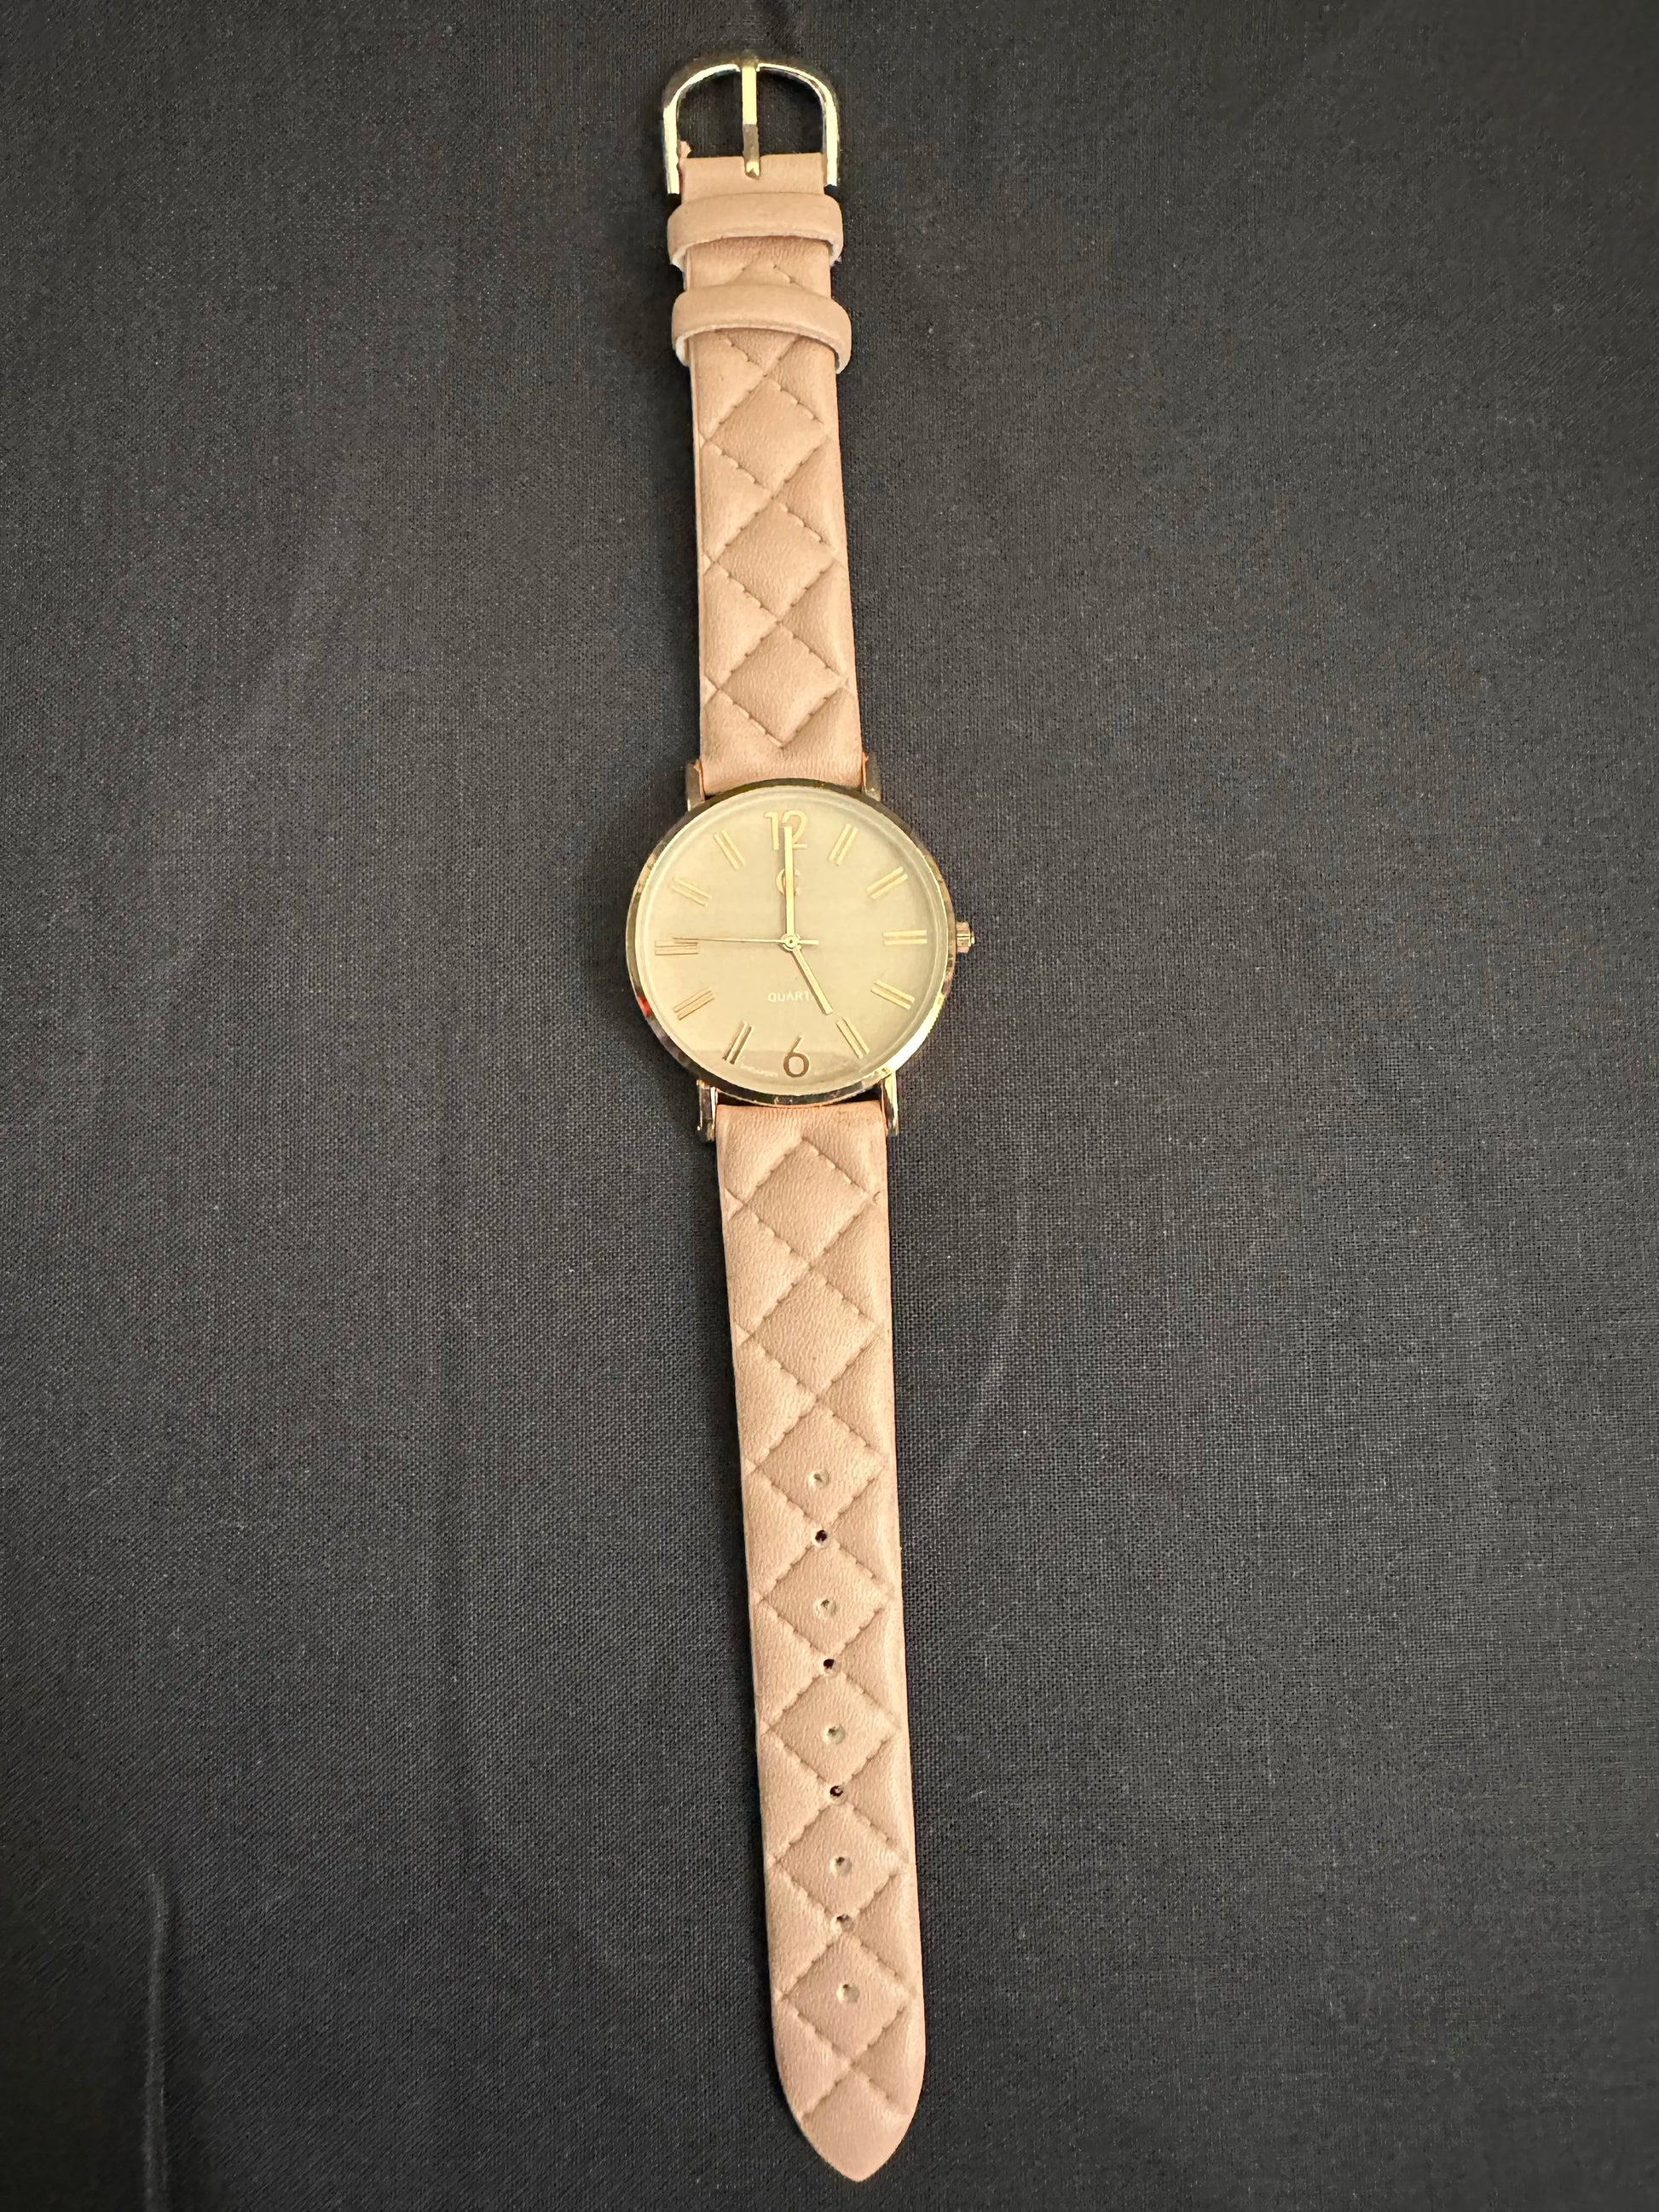 C Pink Watch - Full View